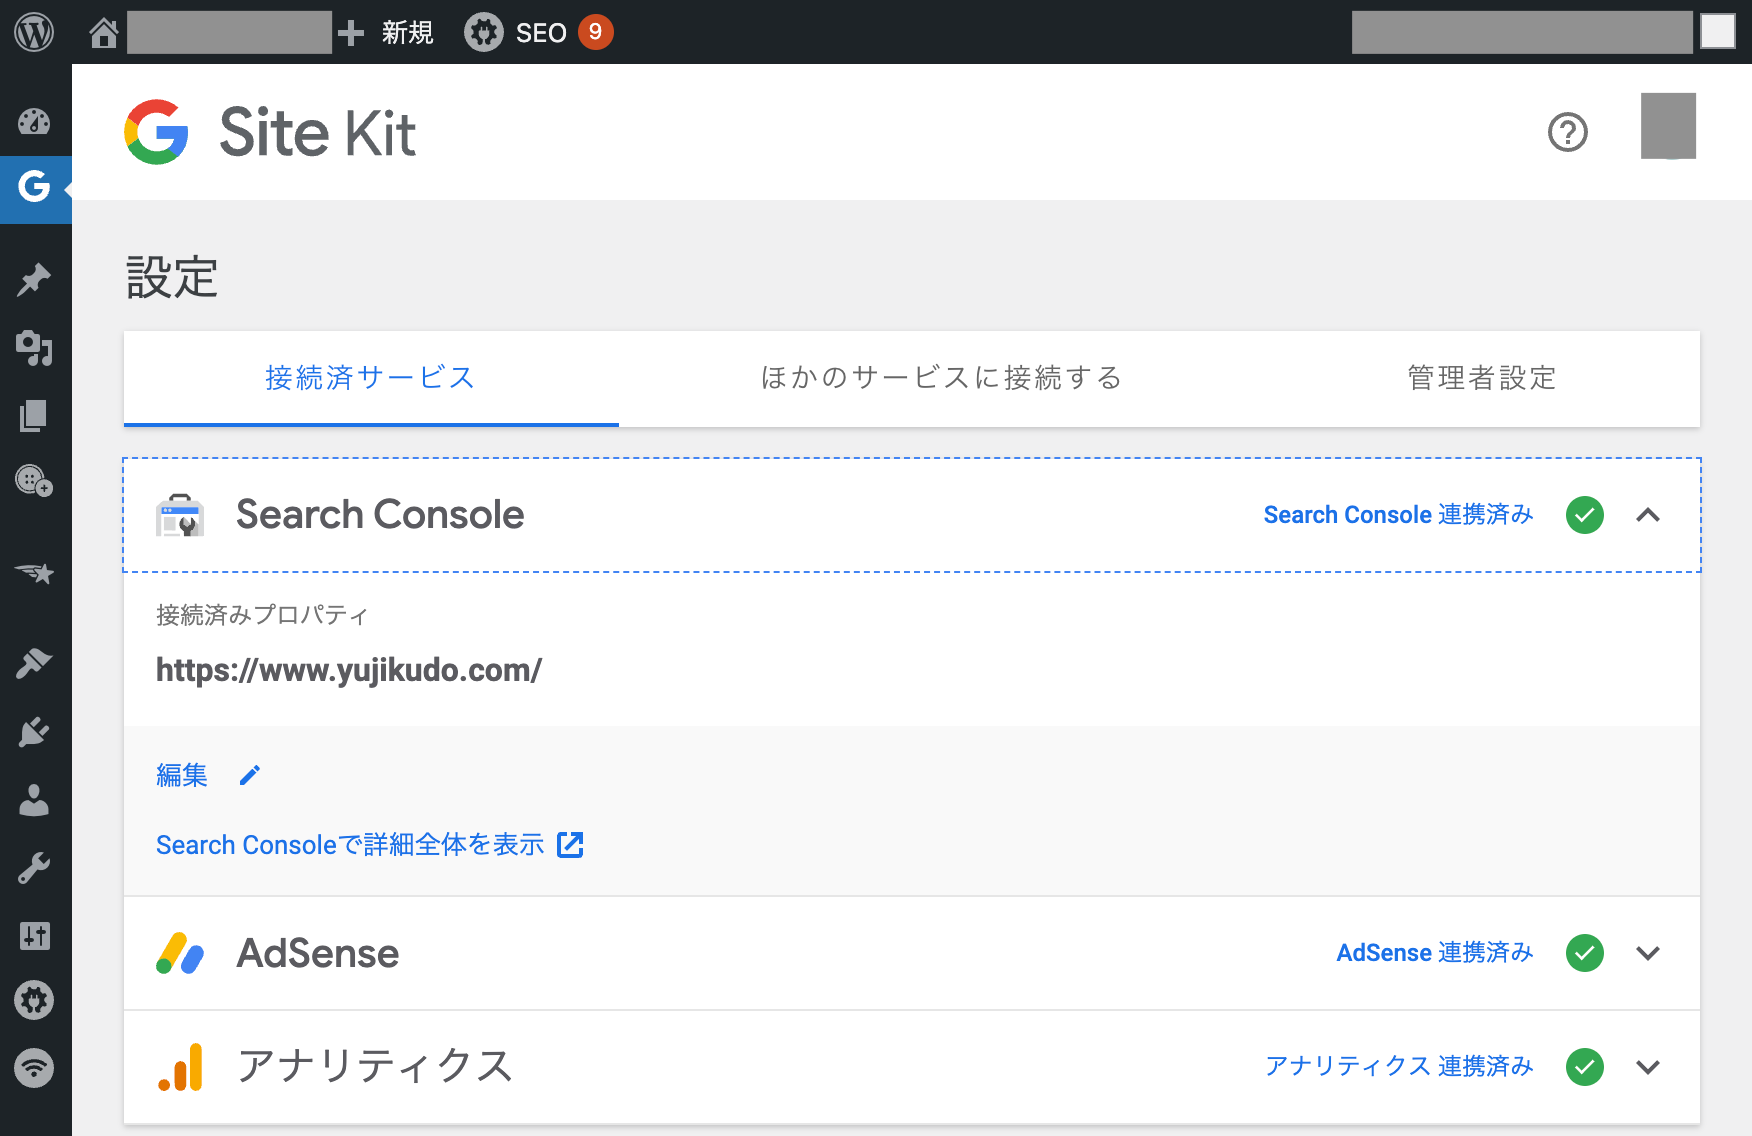 220413-Site Kit by GoogleのSearch Consoleの設定状況